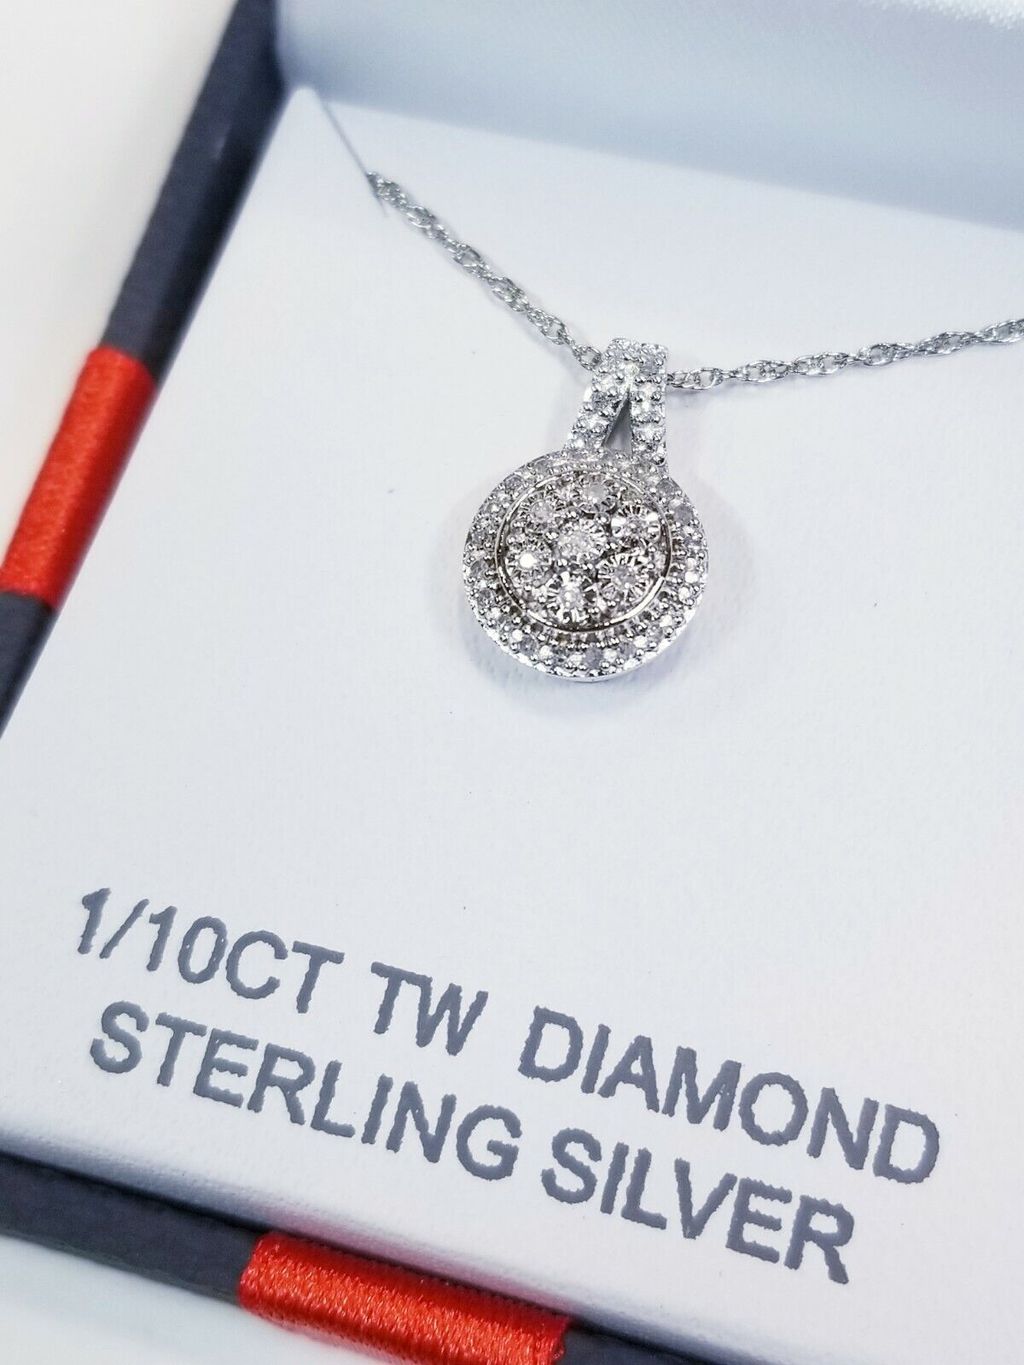 1:10 ct tw genuine diamond sterling silver necklace